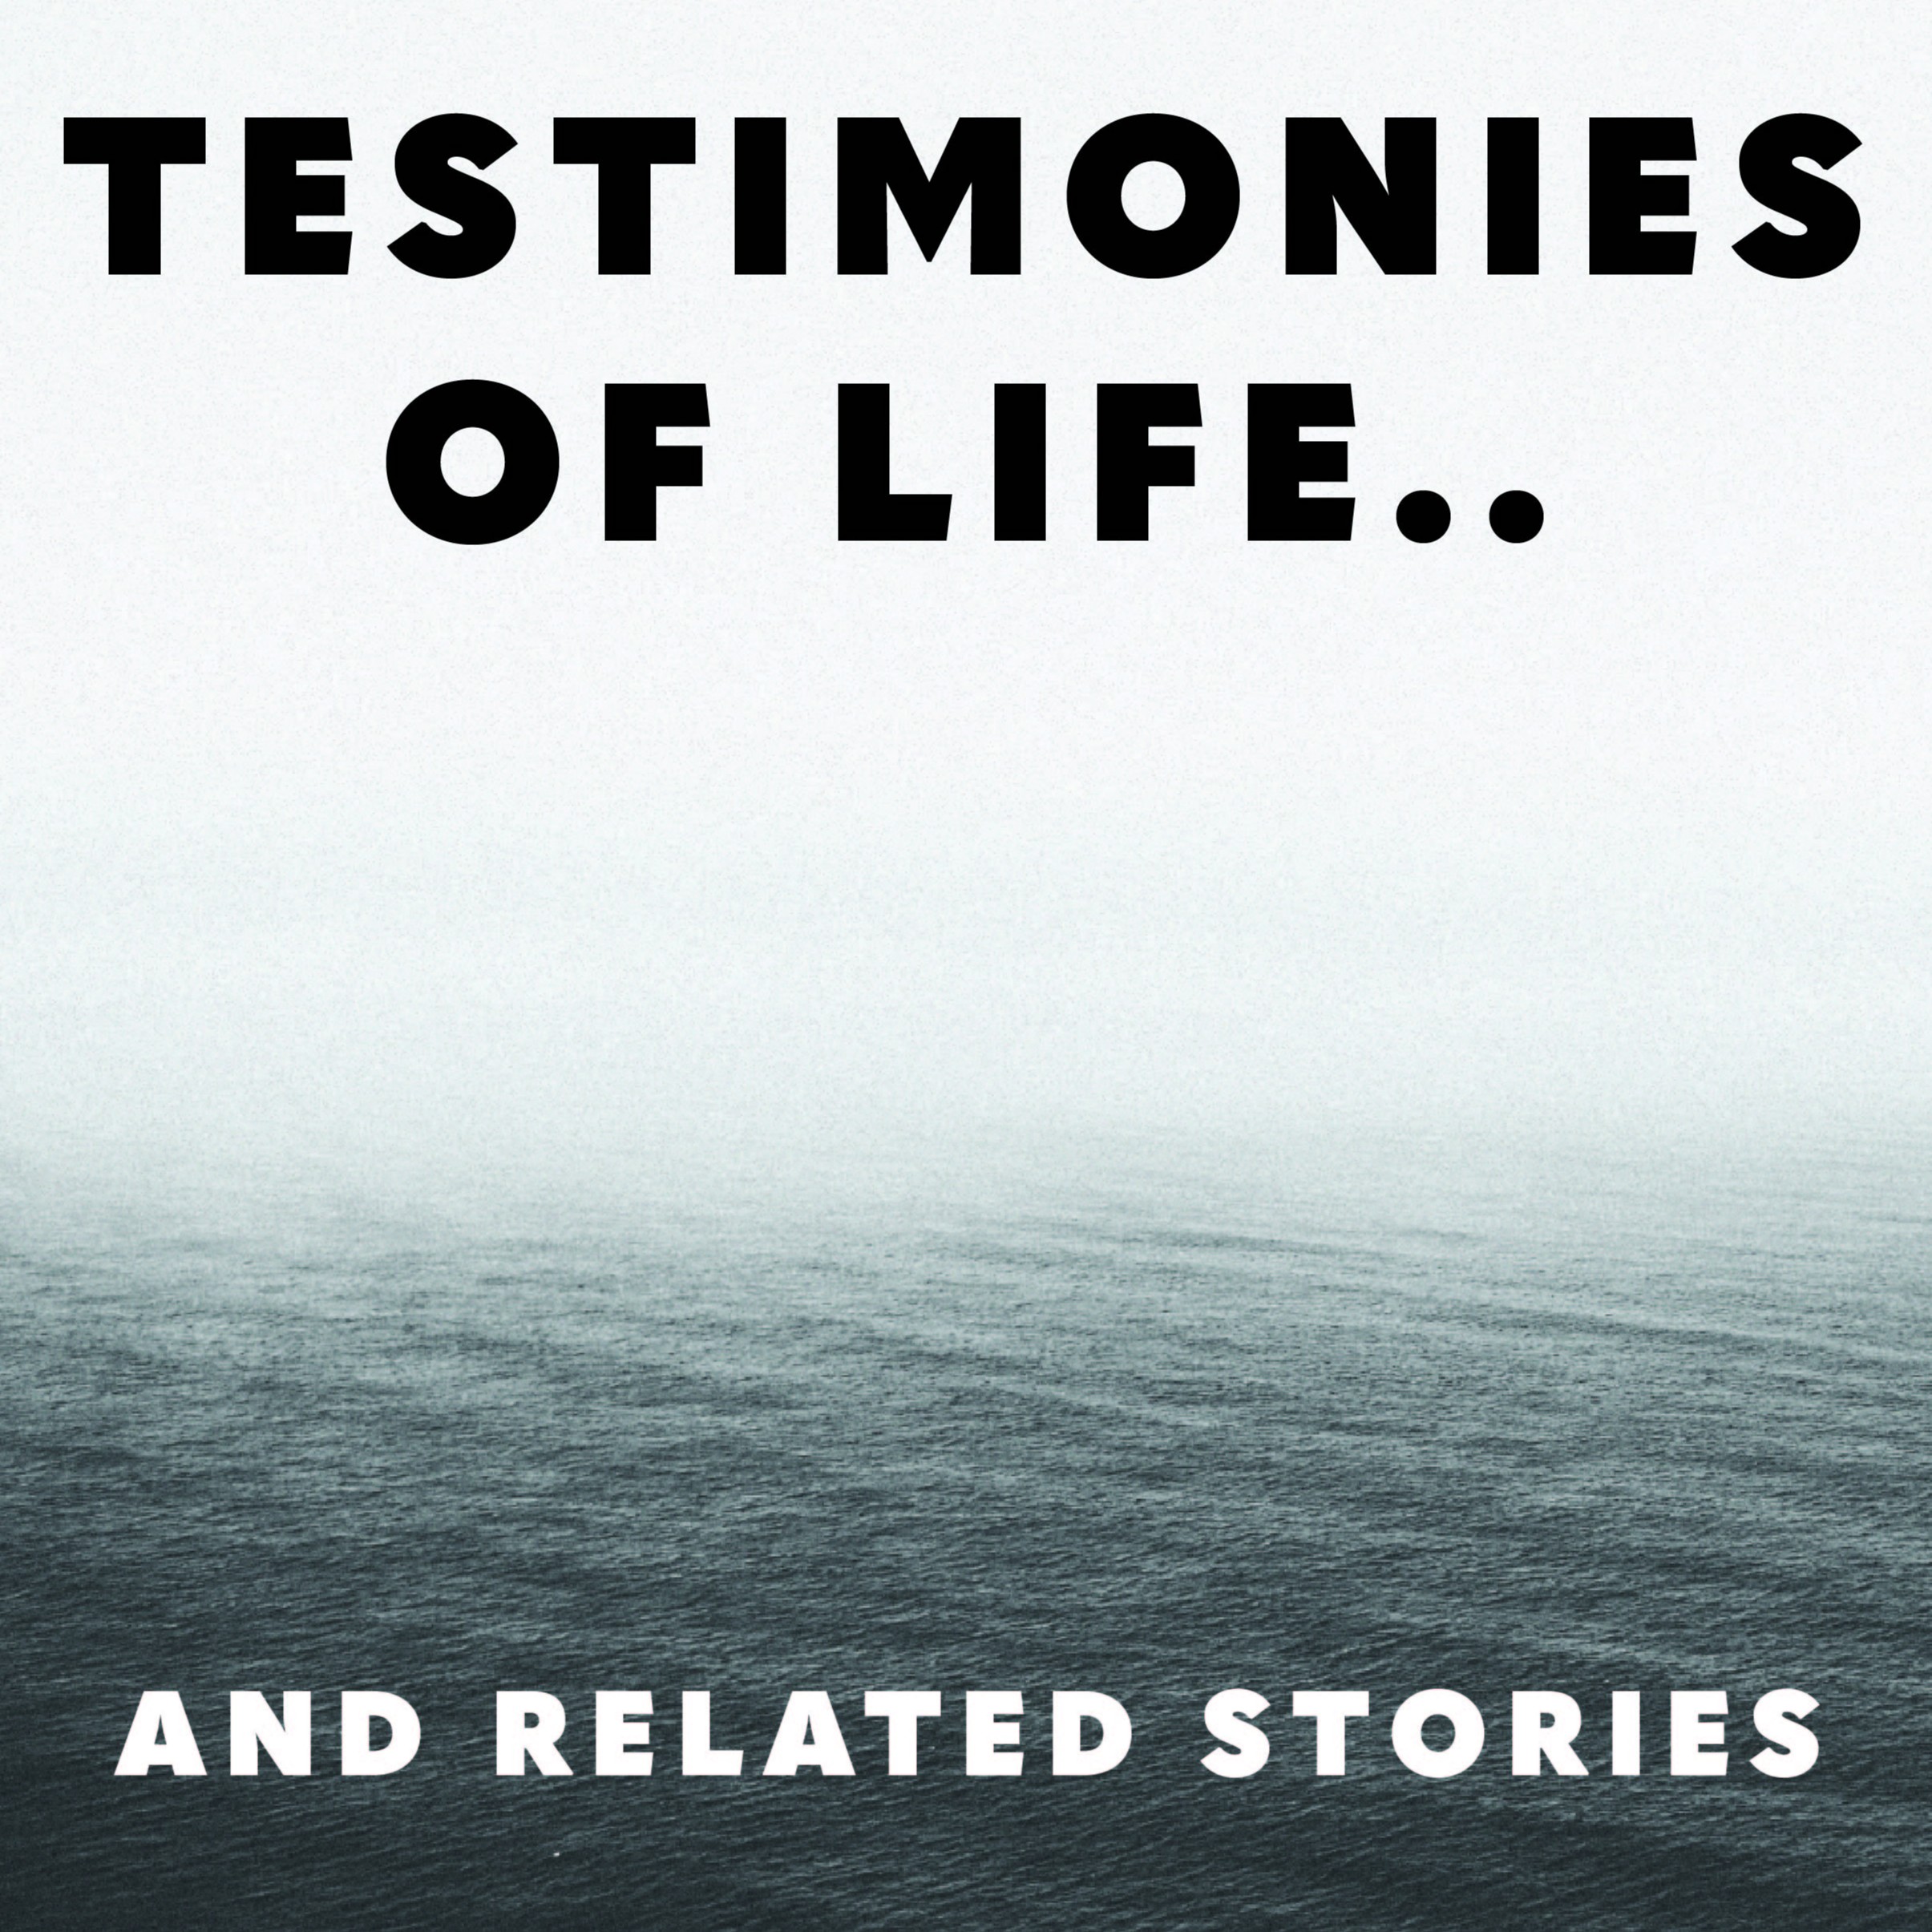 Testimonies of Life.. and related stories